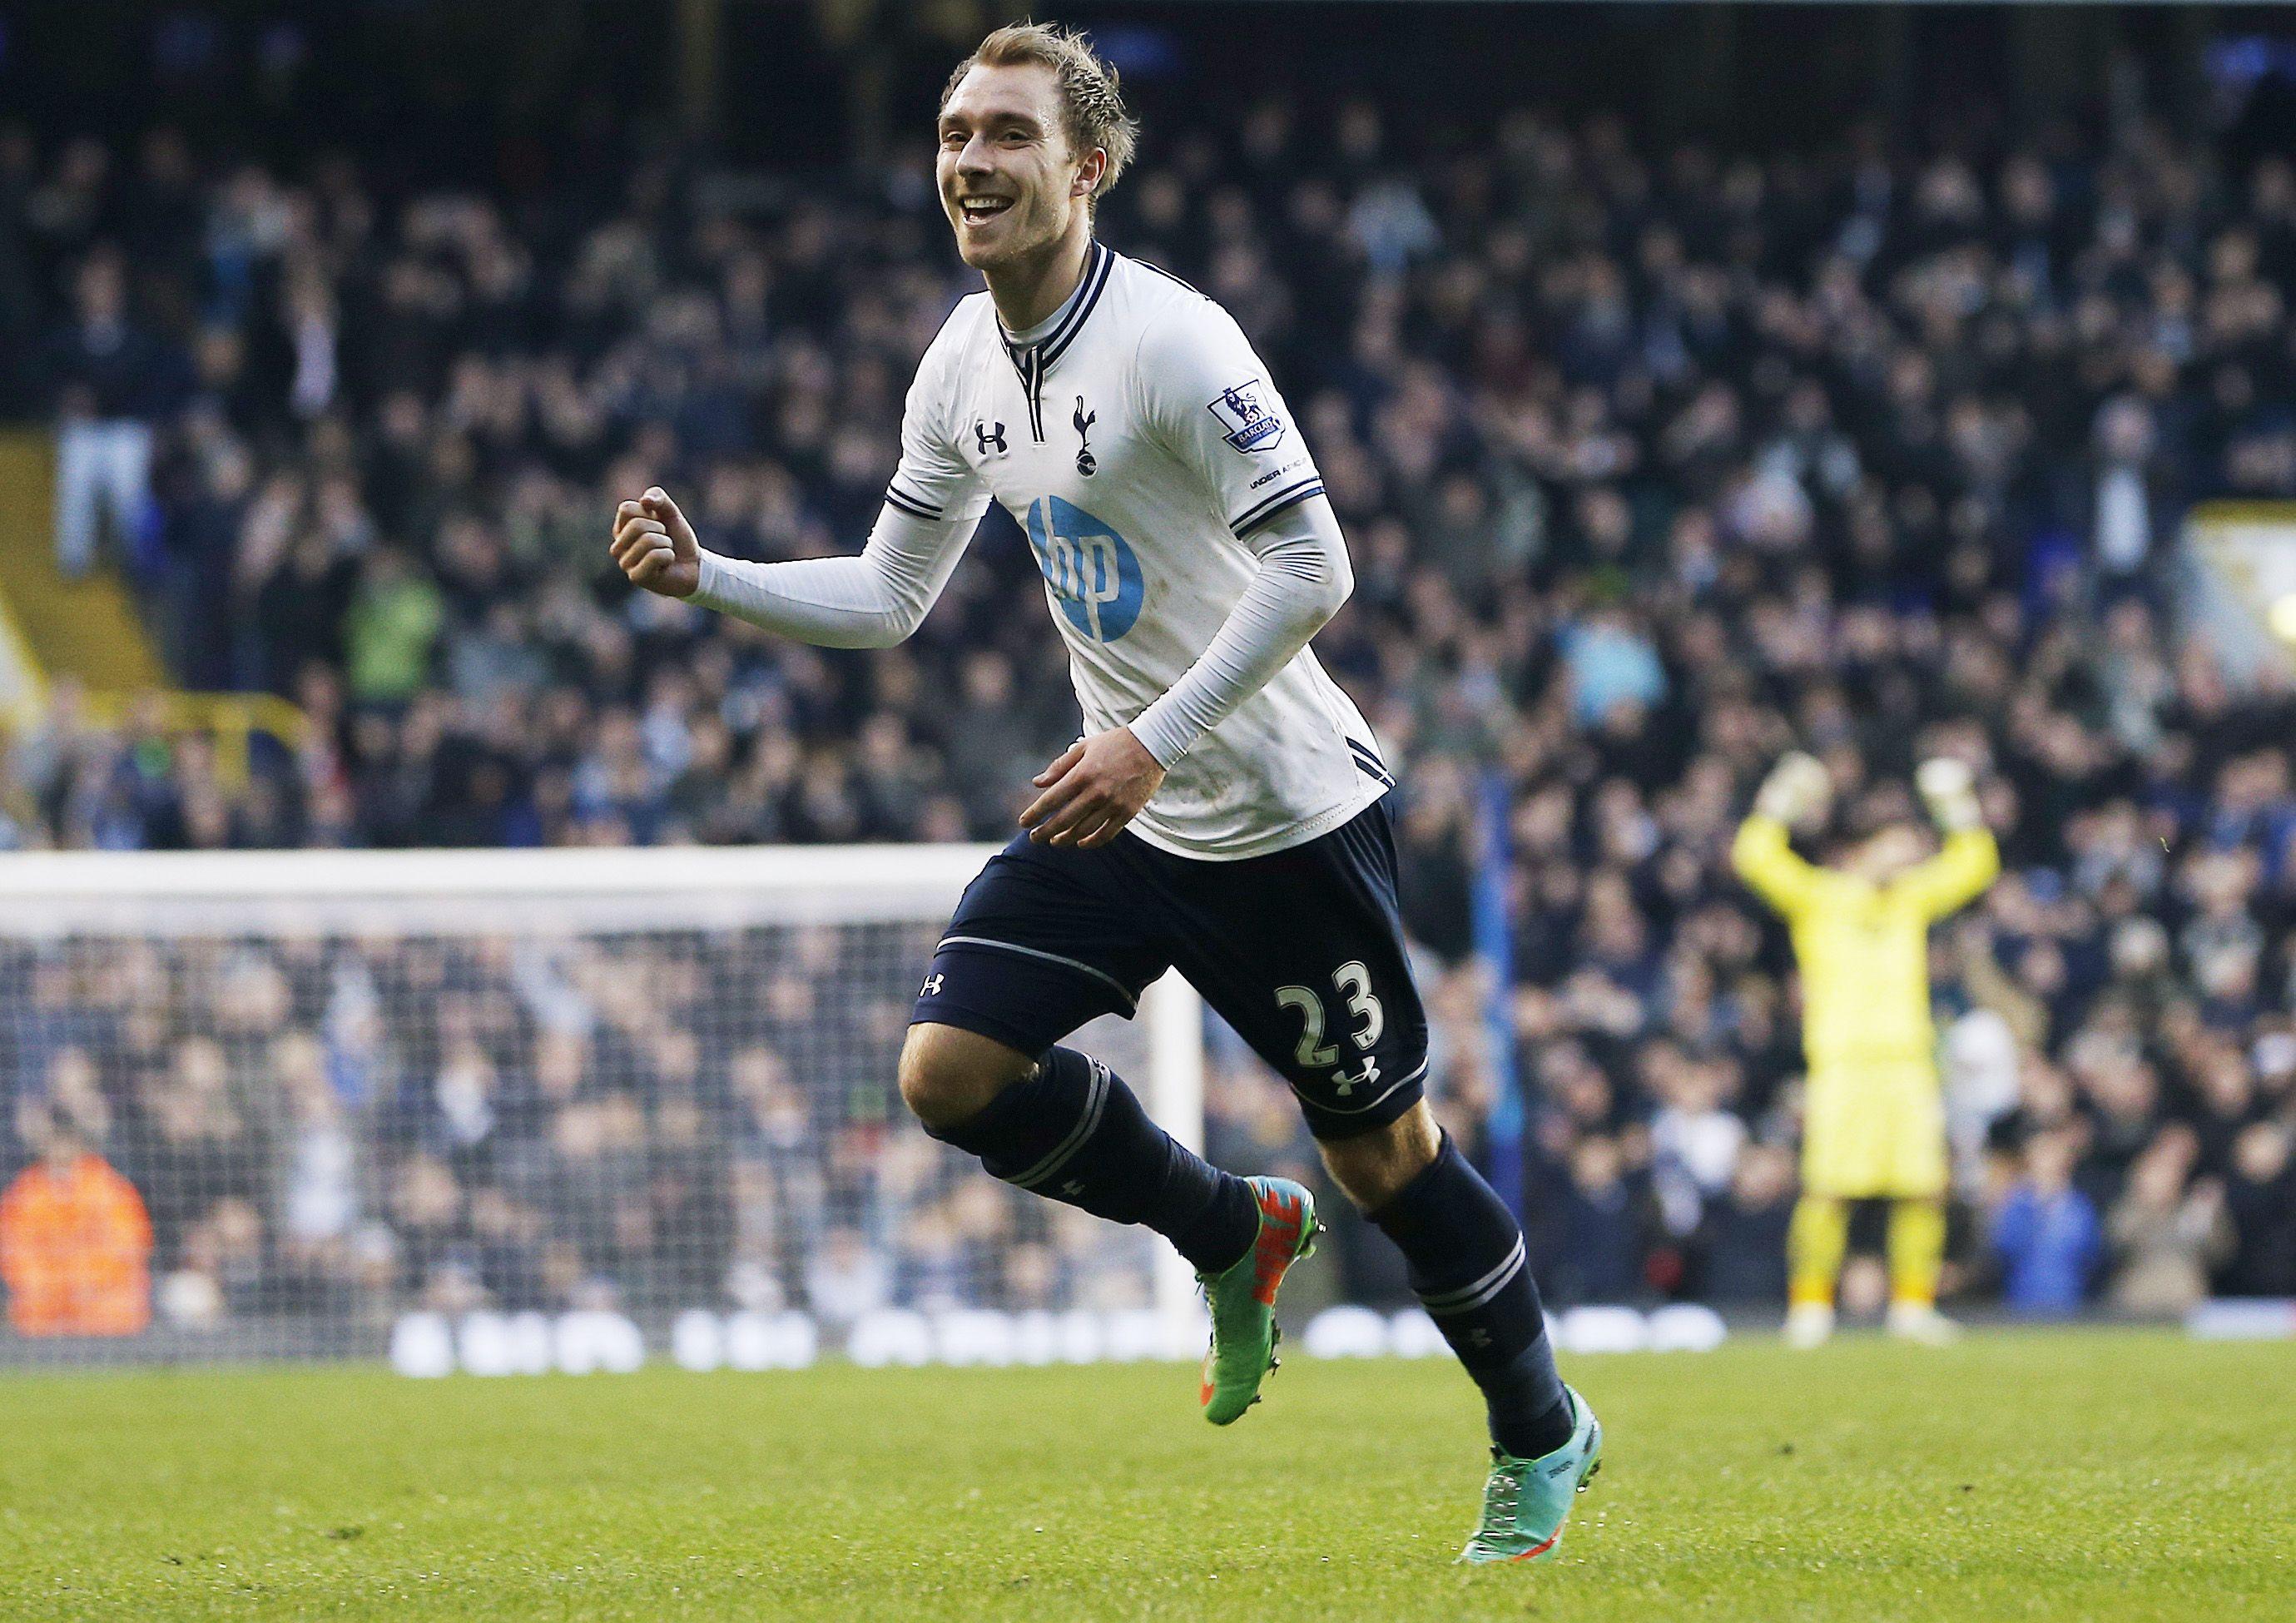 Spurs' Christian Eriksen: I'm not ready to be compared to